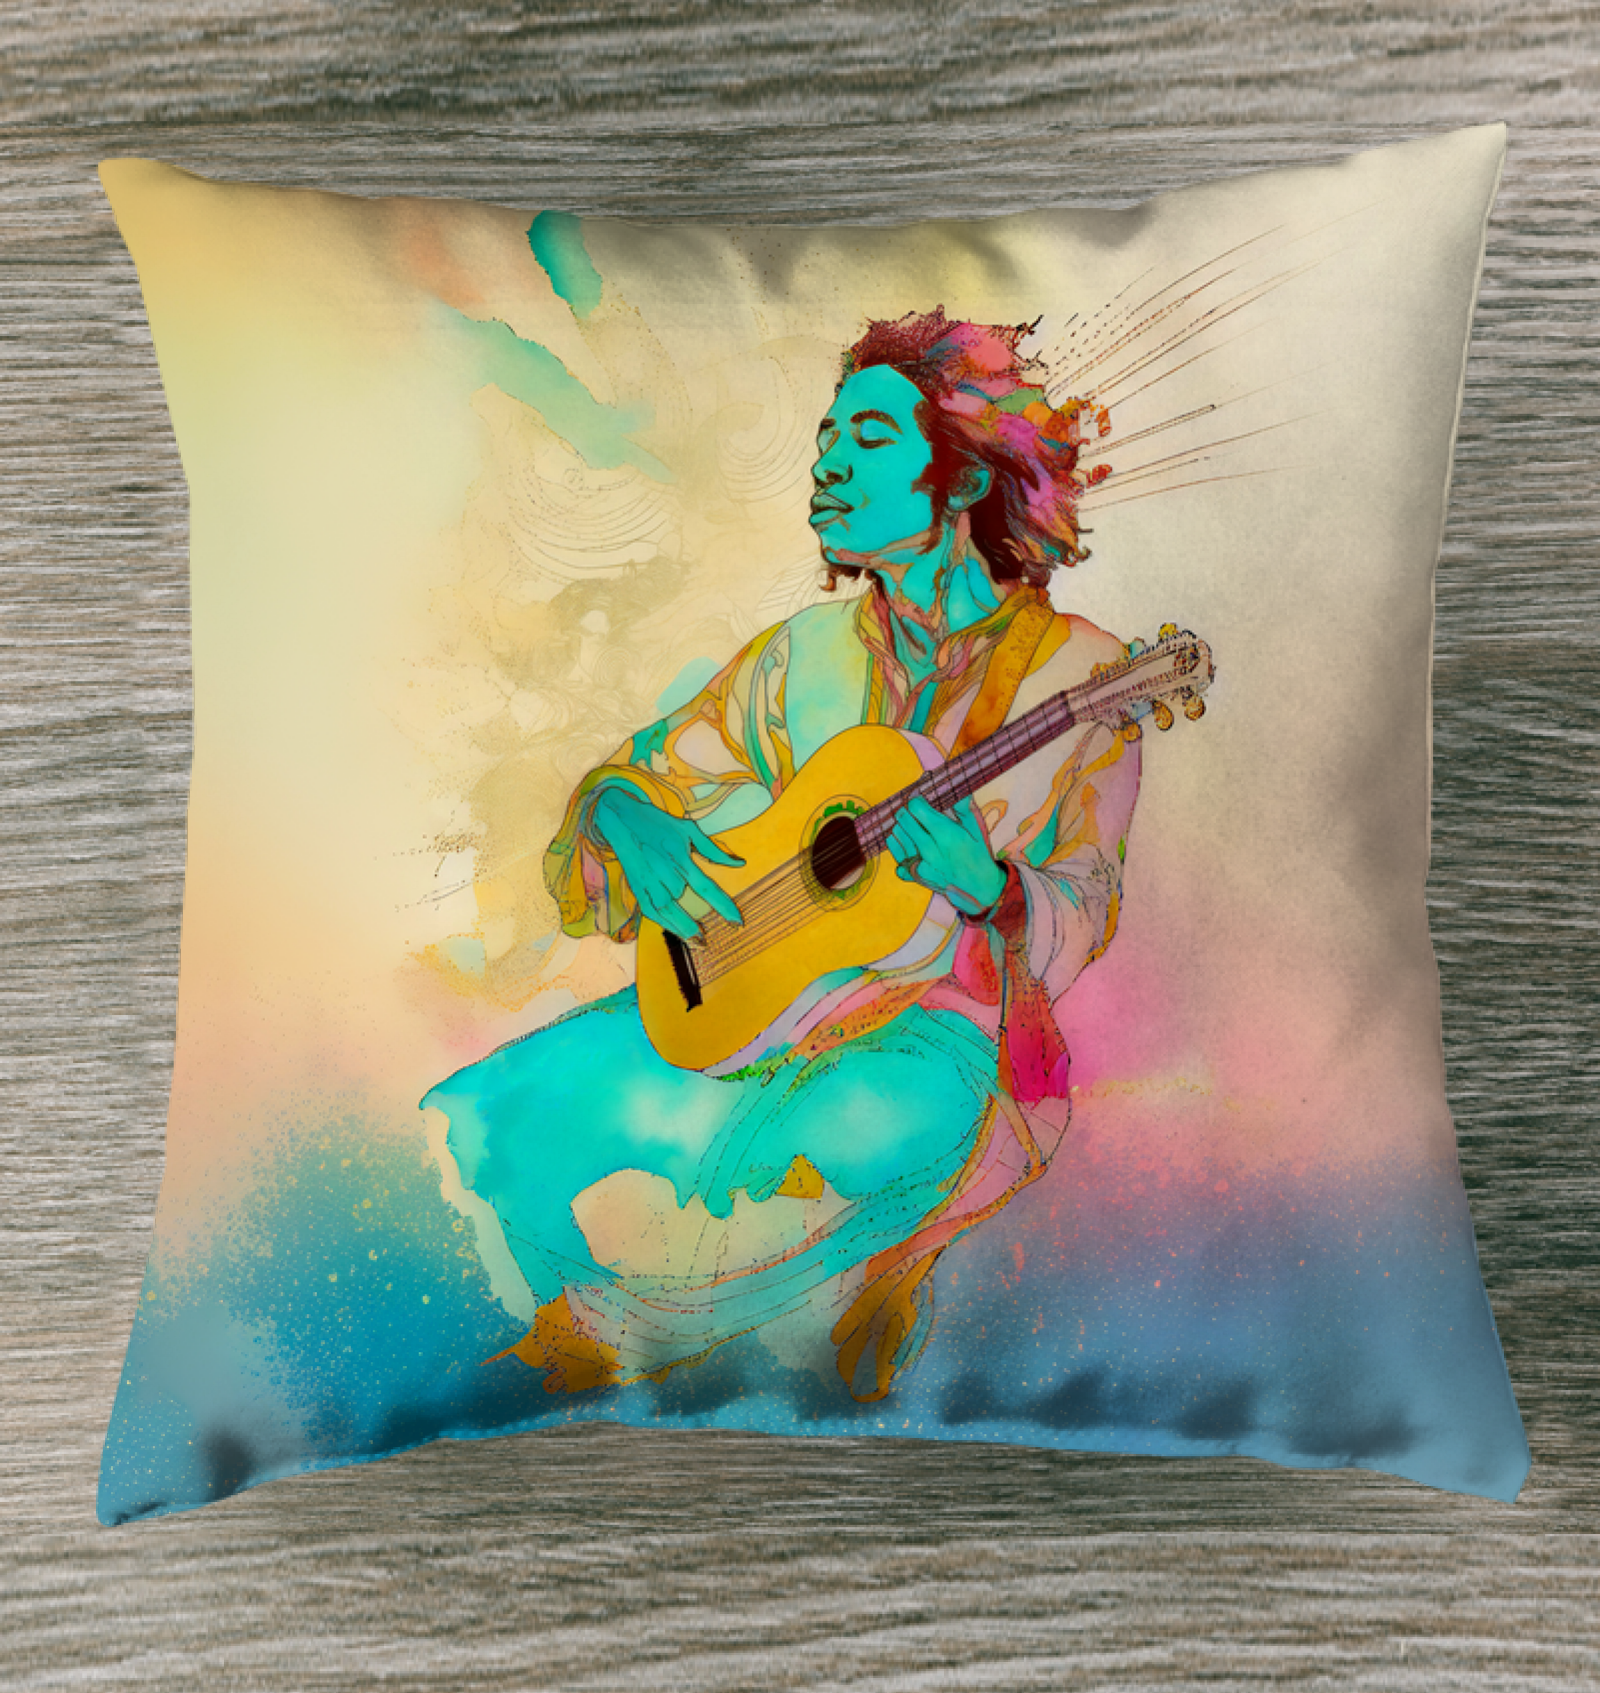 Whimsical Wildflower Indoor Pillow adding playful charm to a sofa.